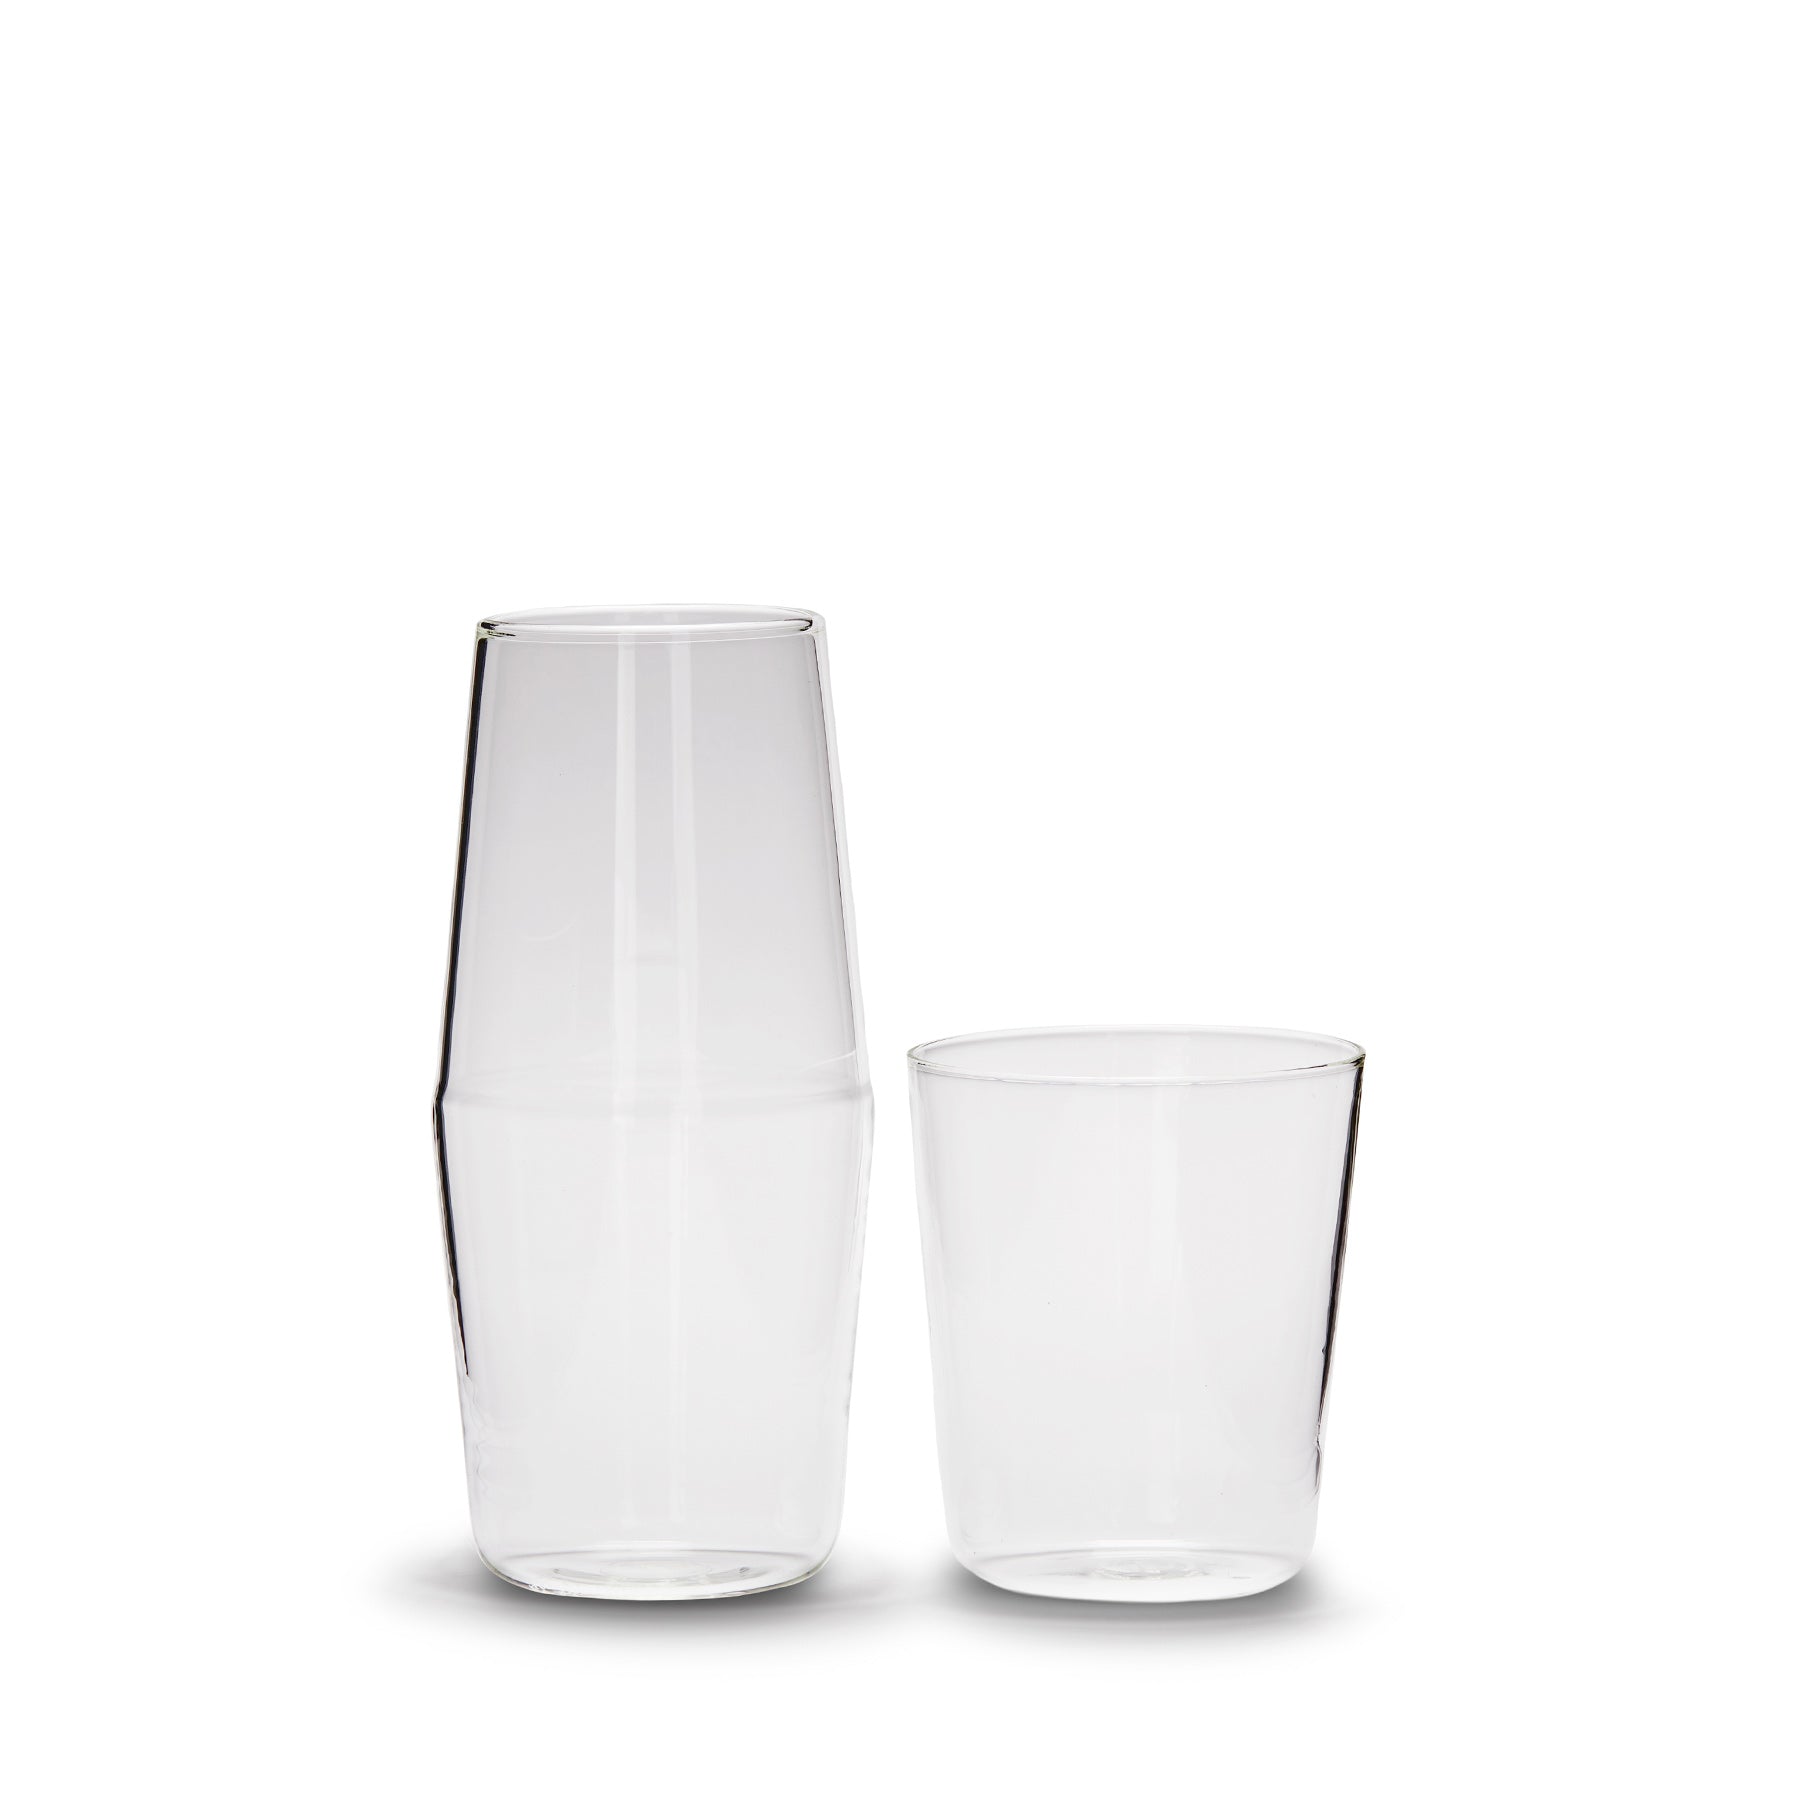 Luisa Bonne Nuit Carafe and Cup in Clear Zoom Image 1